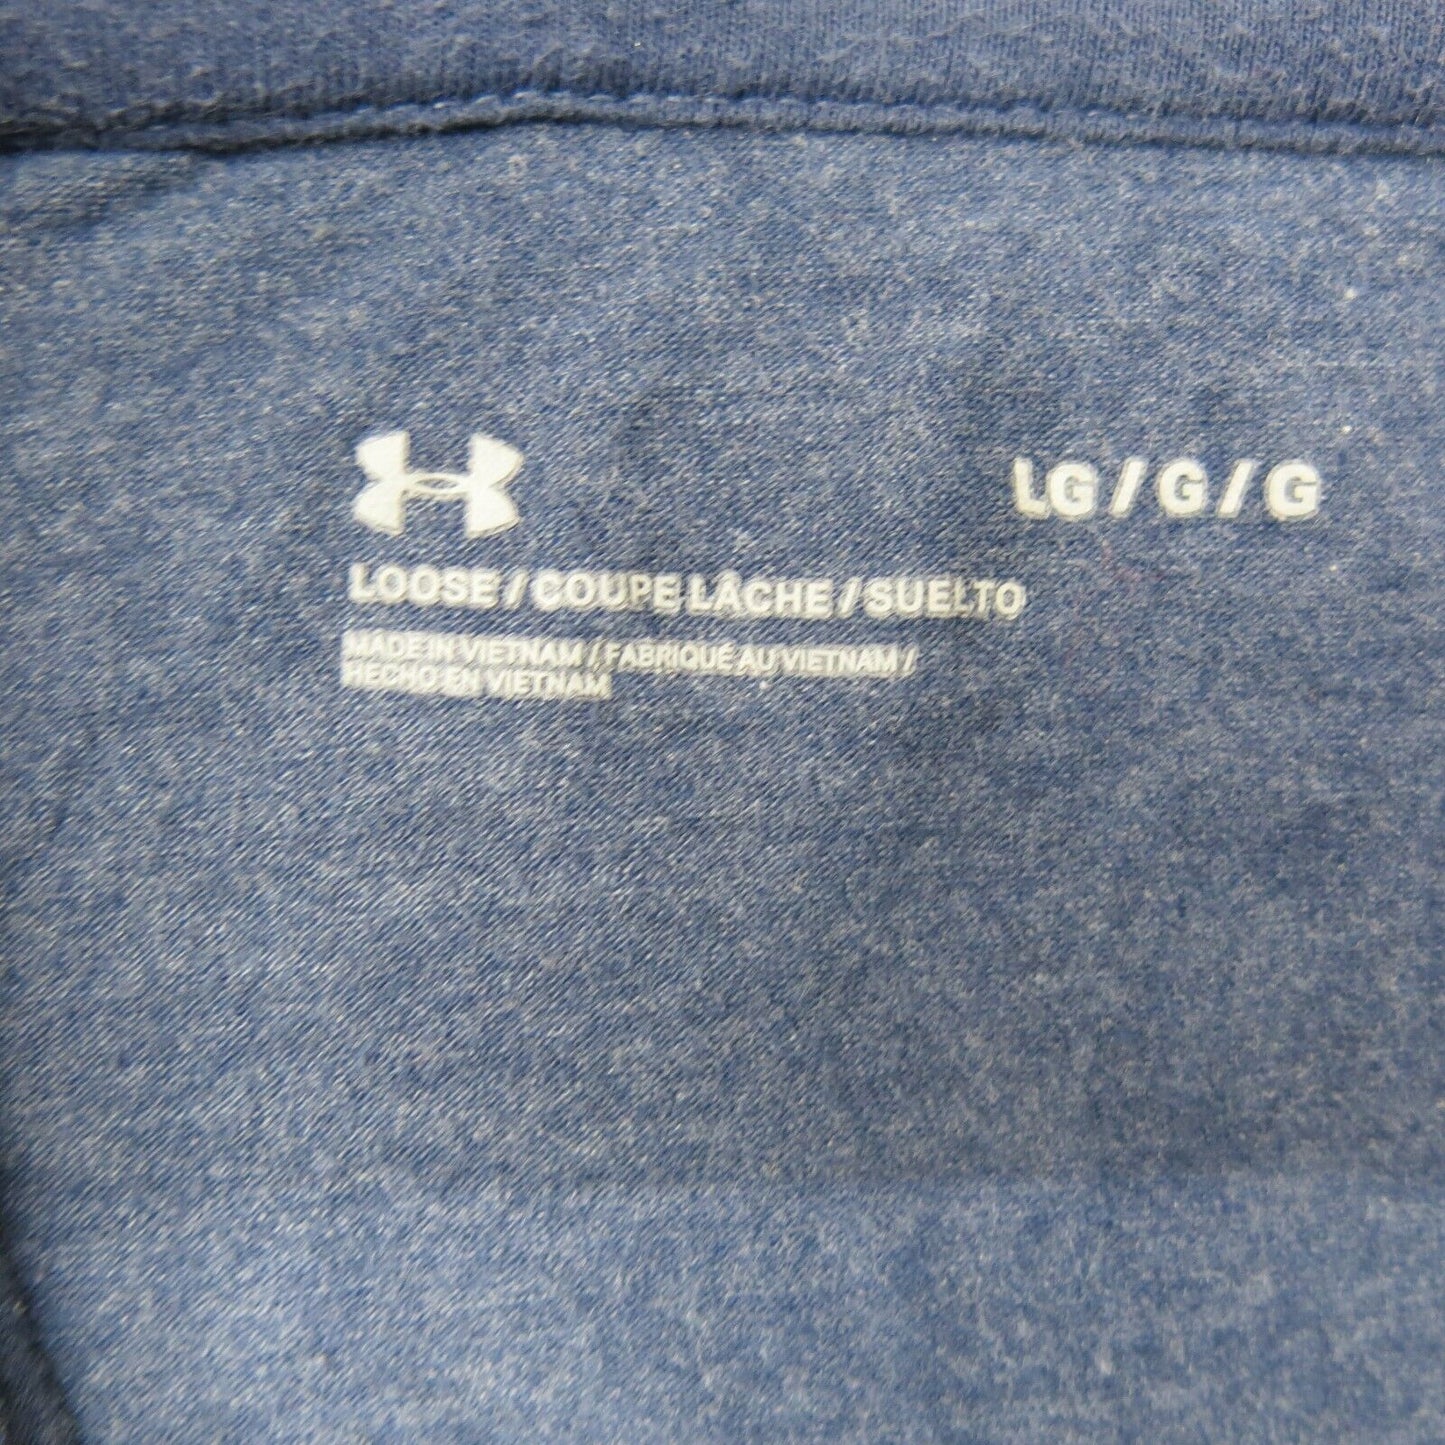 Under Armour Mens Activewear Top 1/4 Zip Long Sleeves Loose Fit Blue Size Large